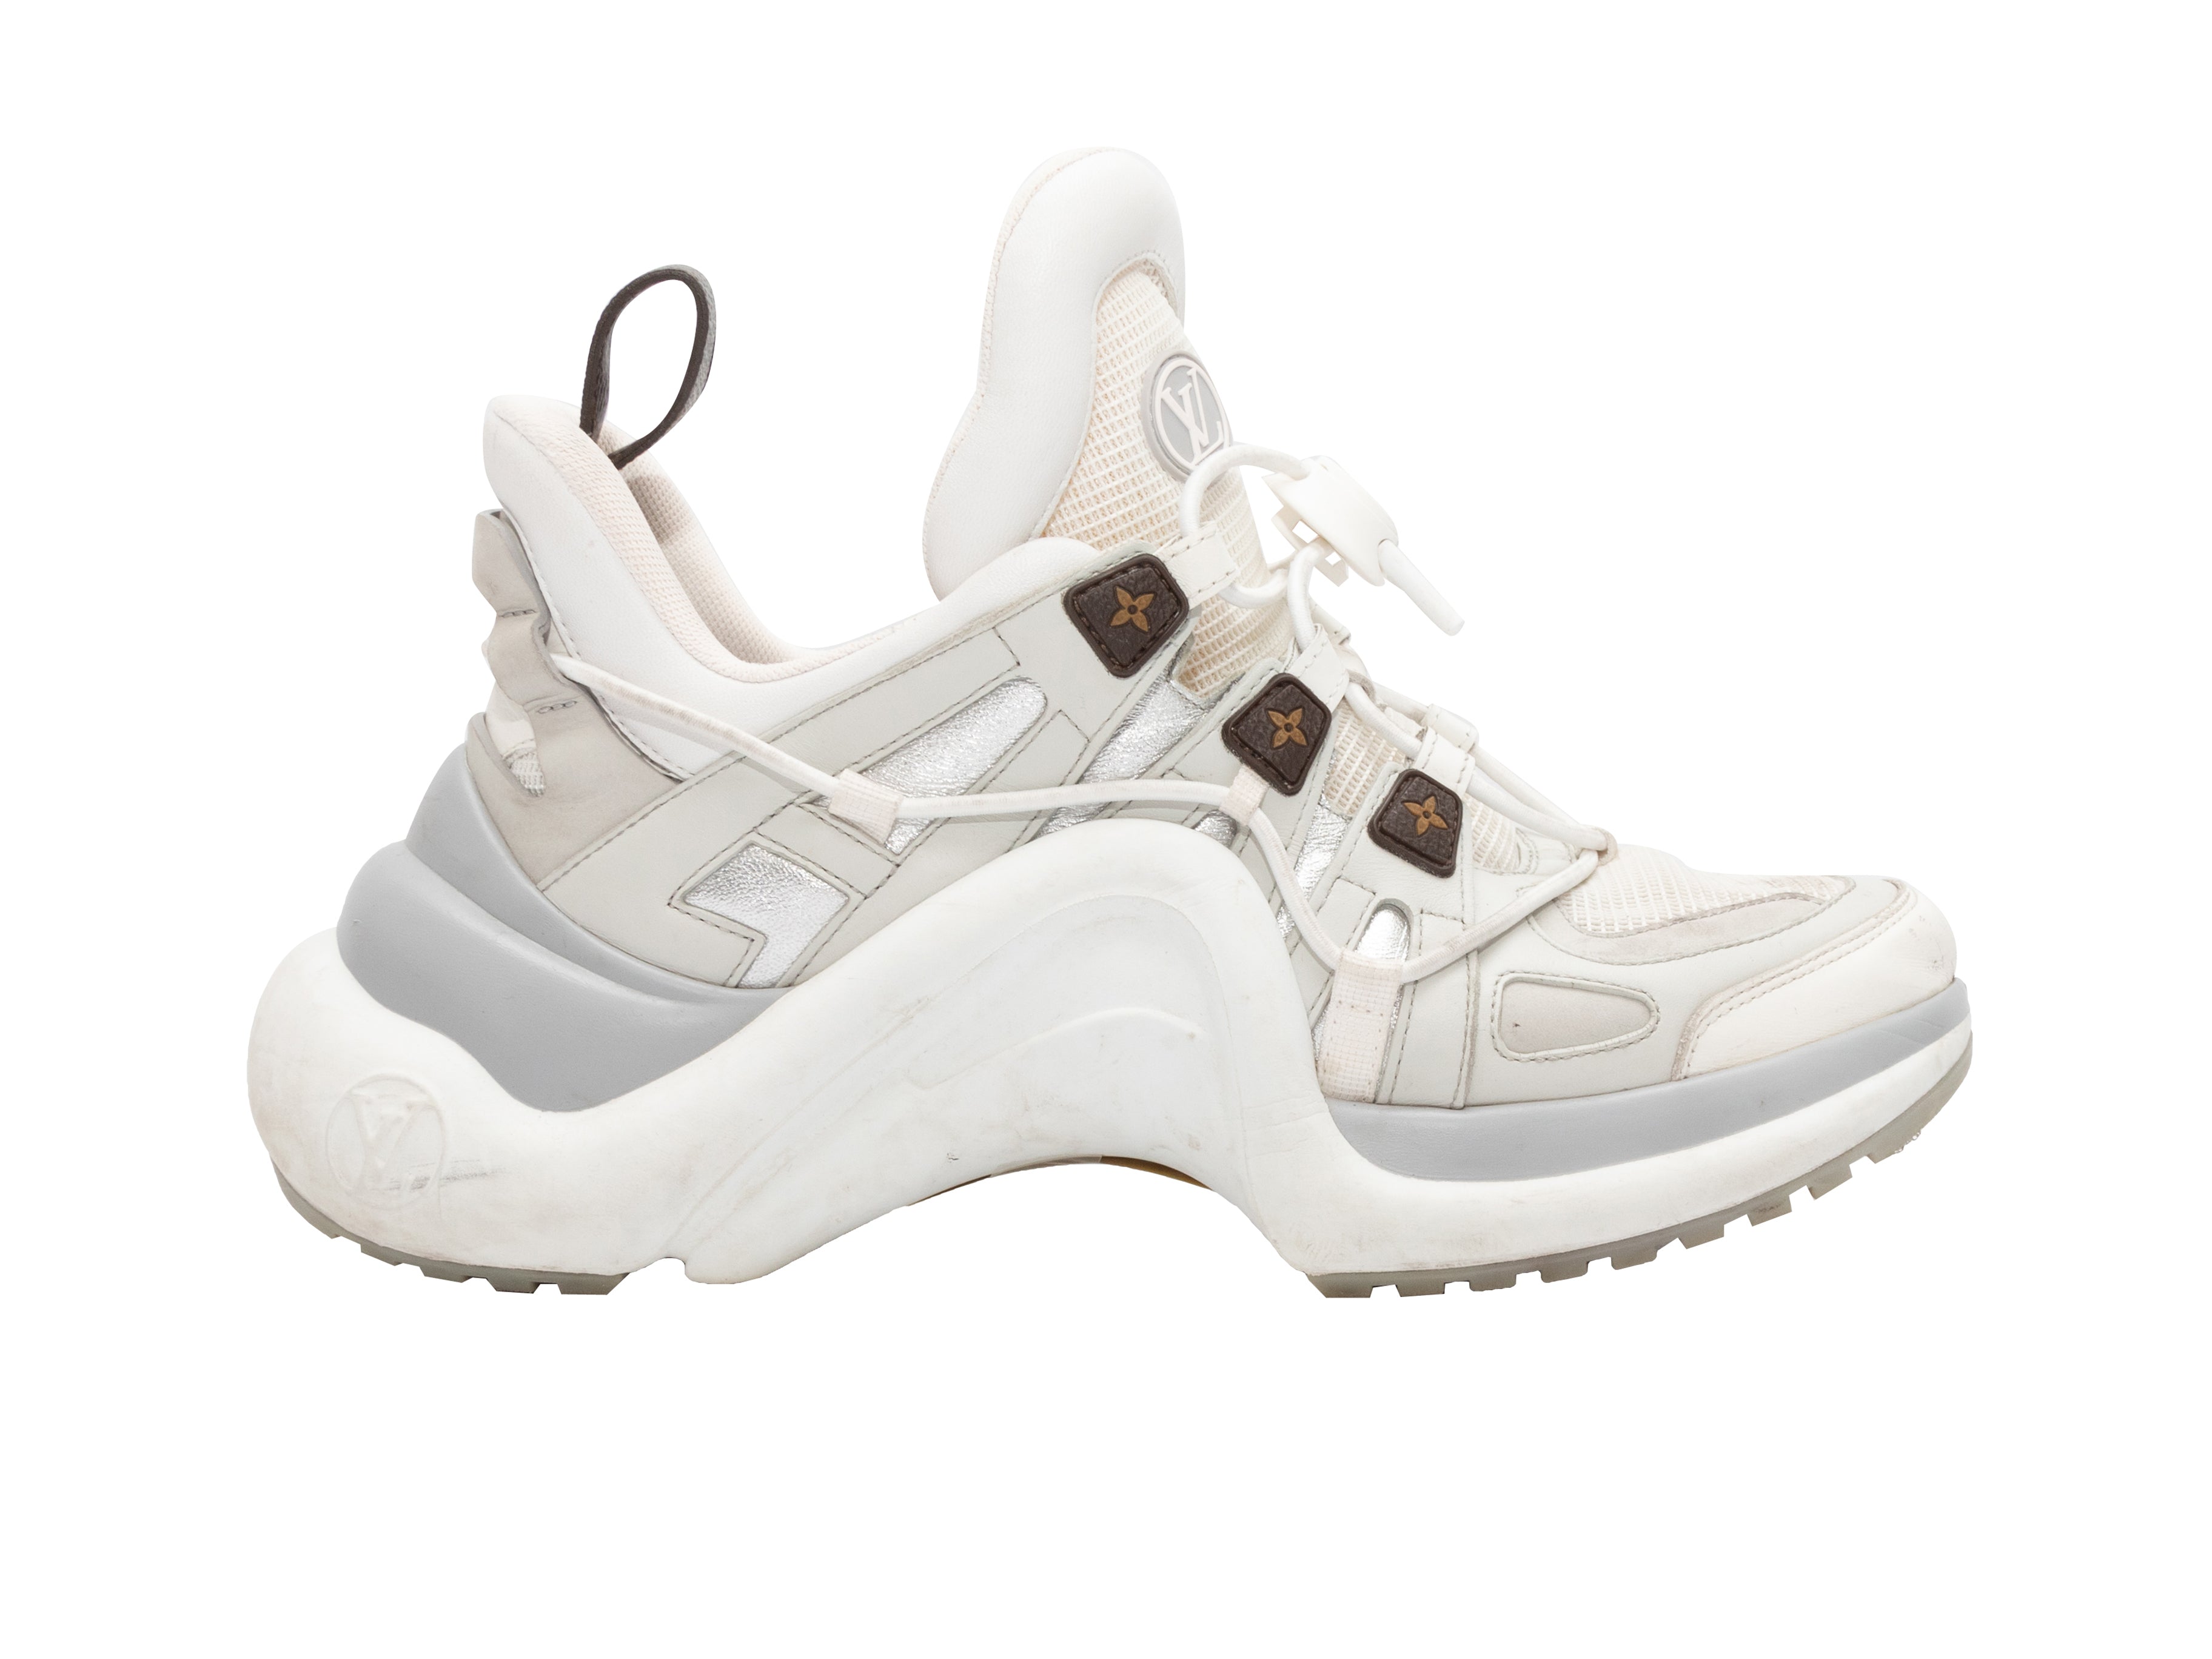 Louis Vuitton Archlight Womens Sneakers 38 White Authentic